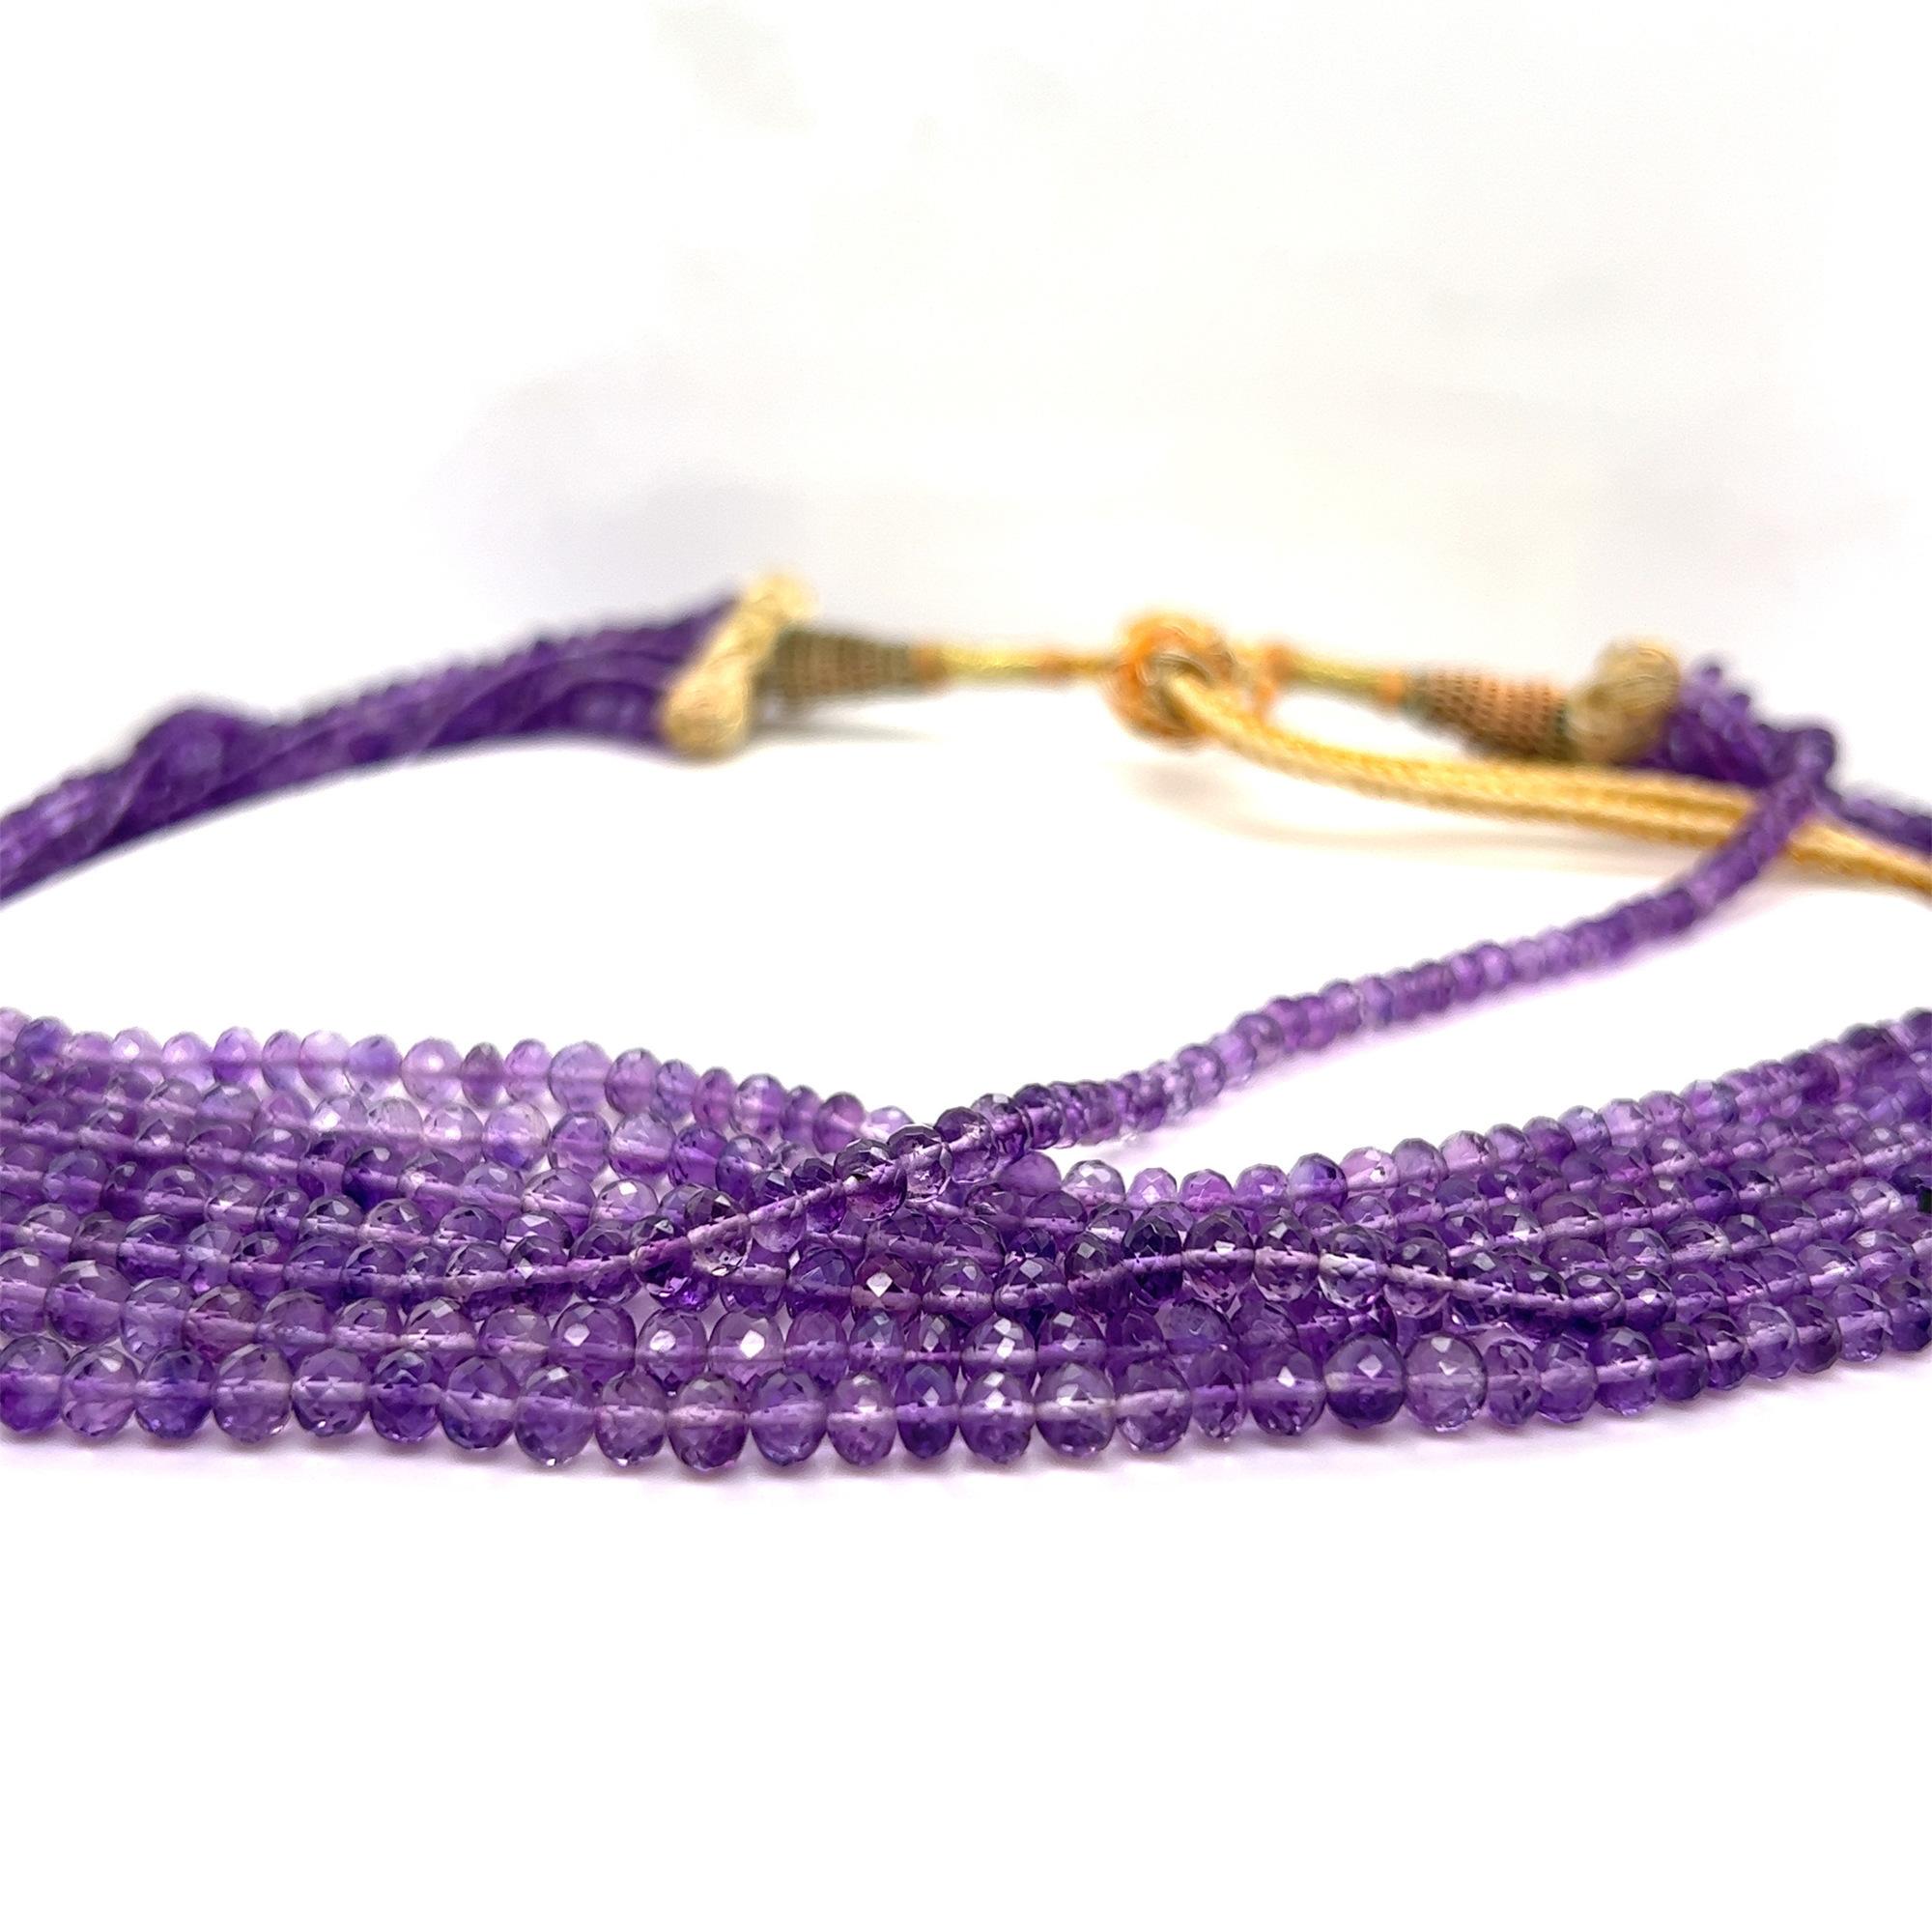 Adorn the stunning statement look with this beautiful Amethyst beaded necklace. This fine handmade piece features 7 strands of fine color amethyst beads set in graduated lengths. Extremely well matched and fine quality beads. Total carat weight: